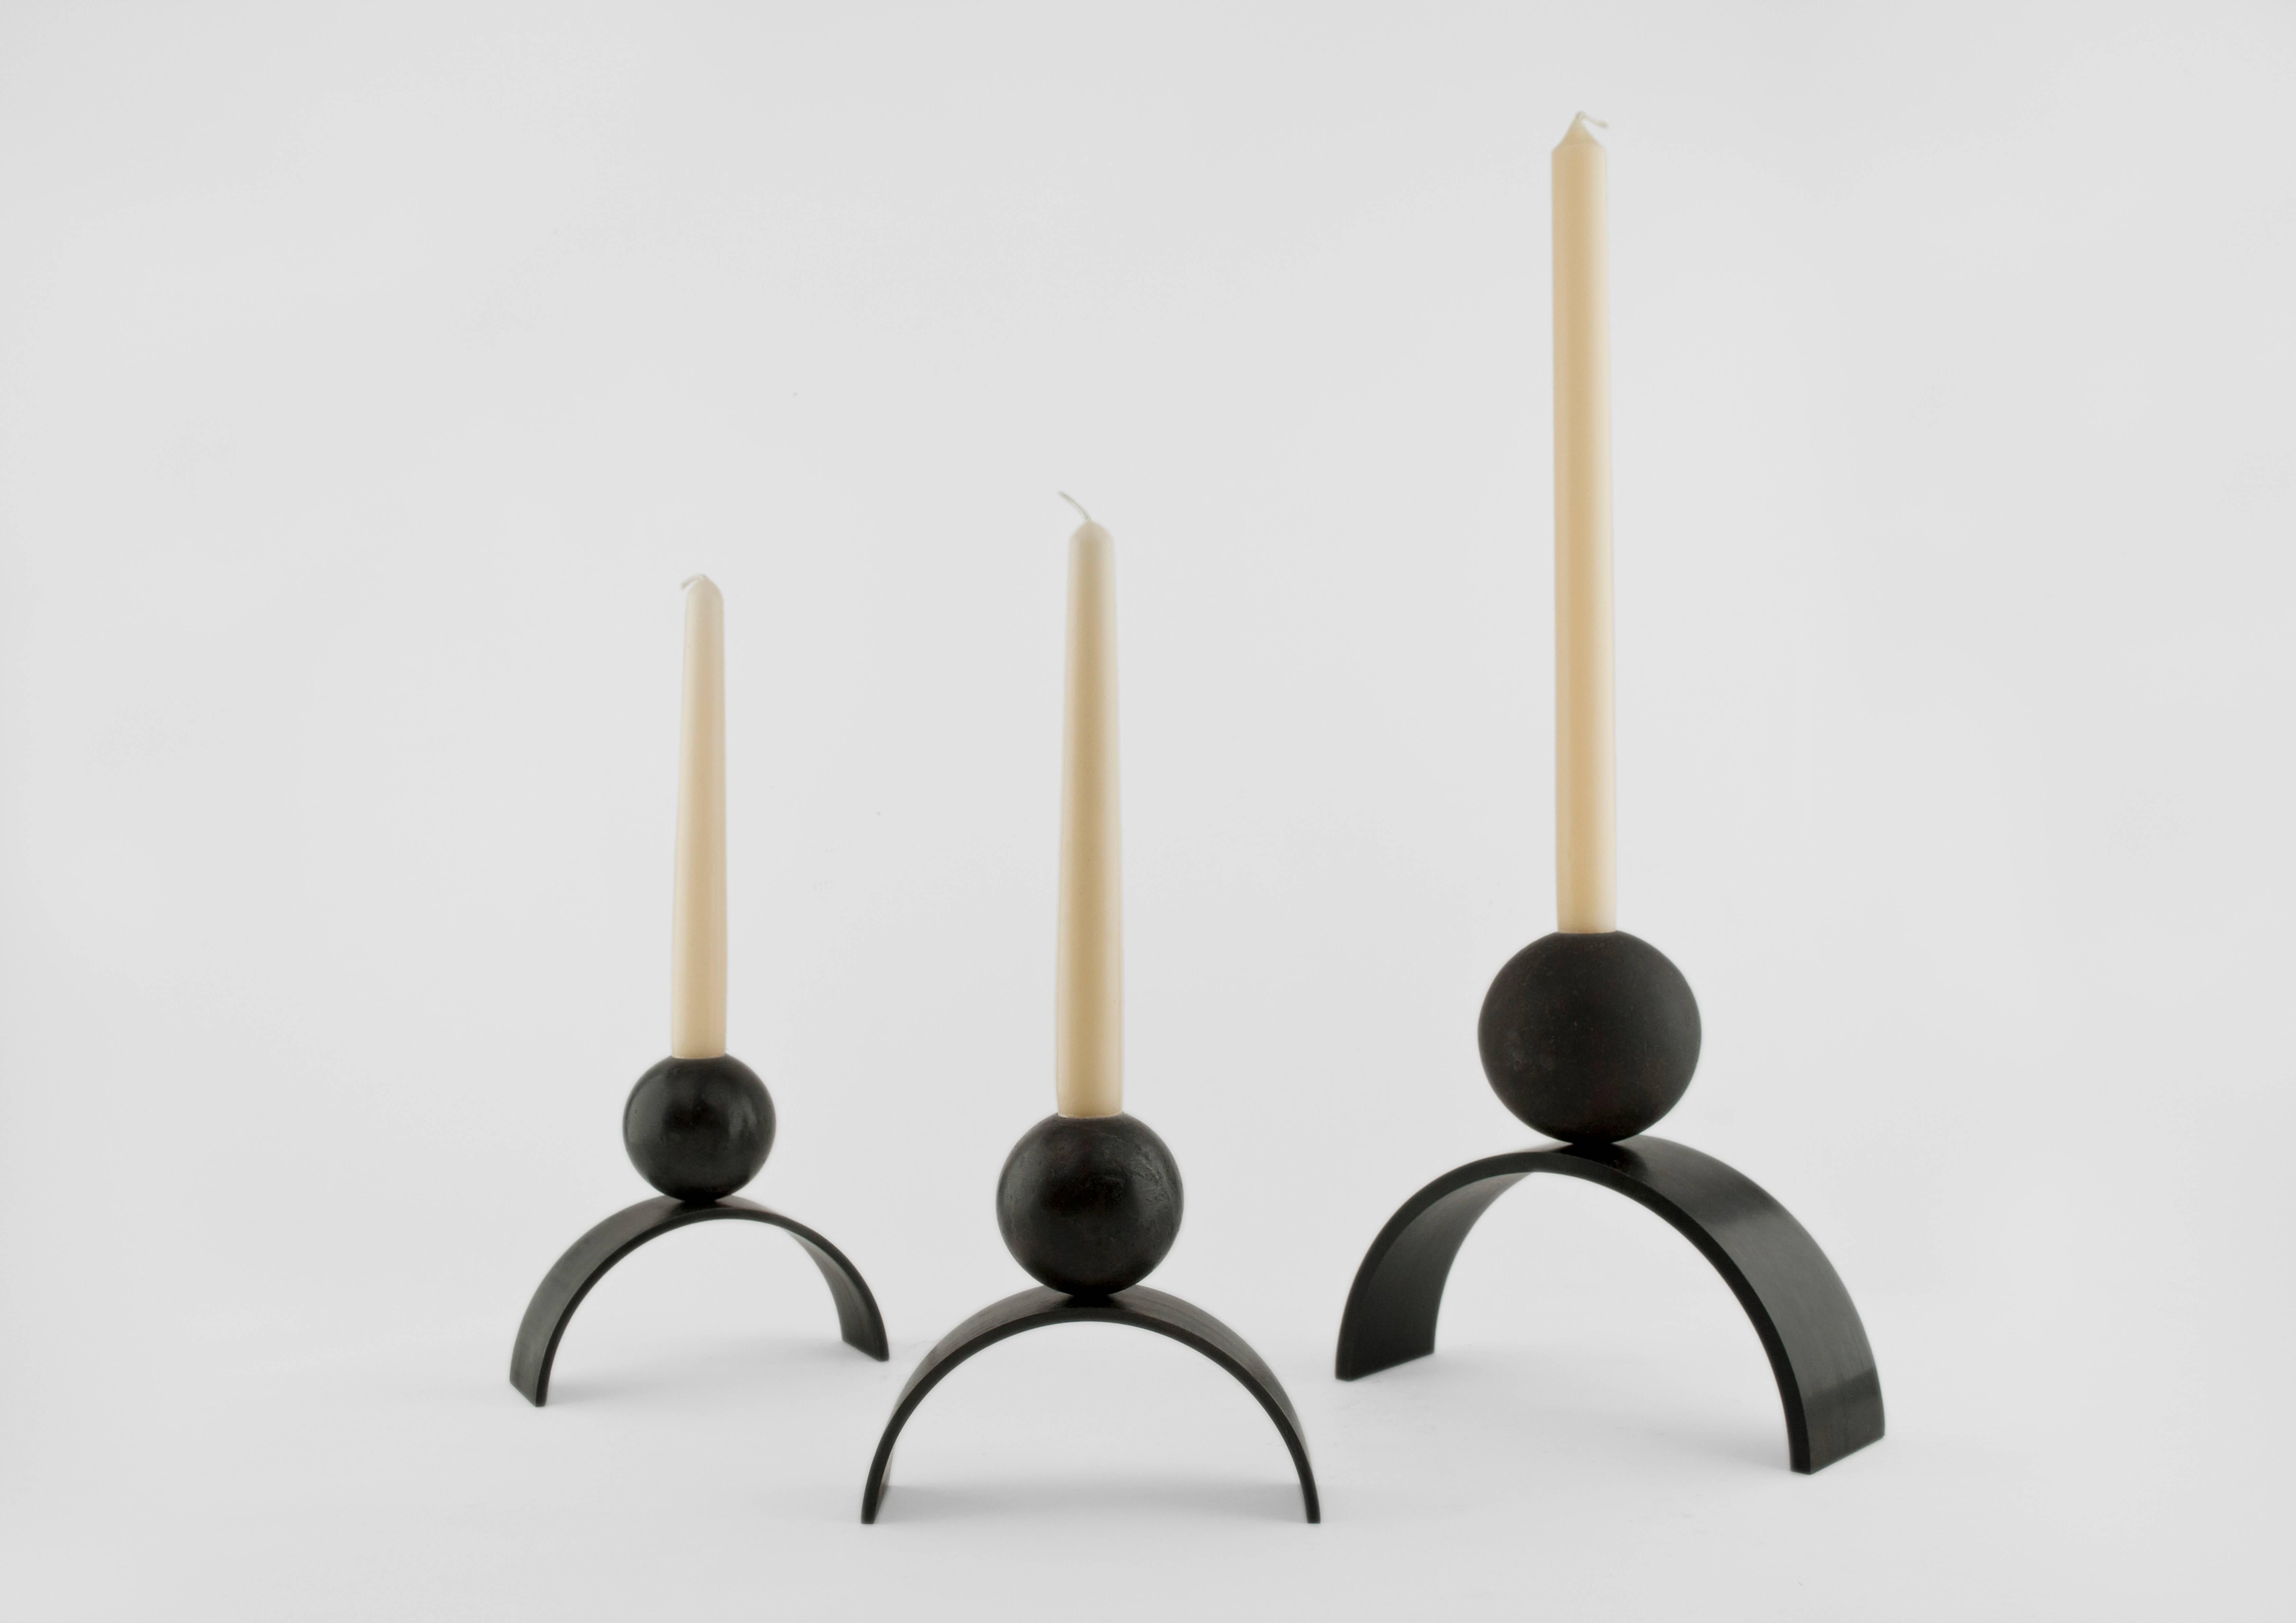 Metal Contemporary Candle Holder Arch and Ball, Blackened Heavy Steel 